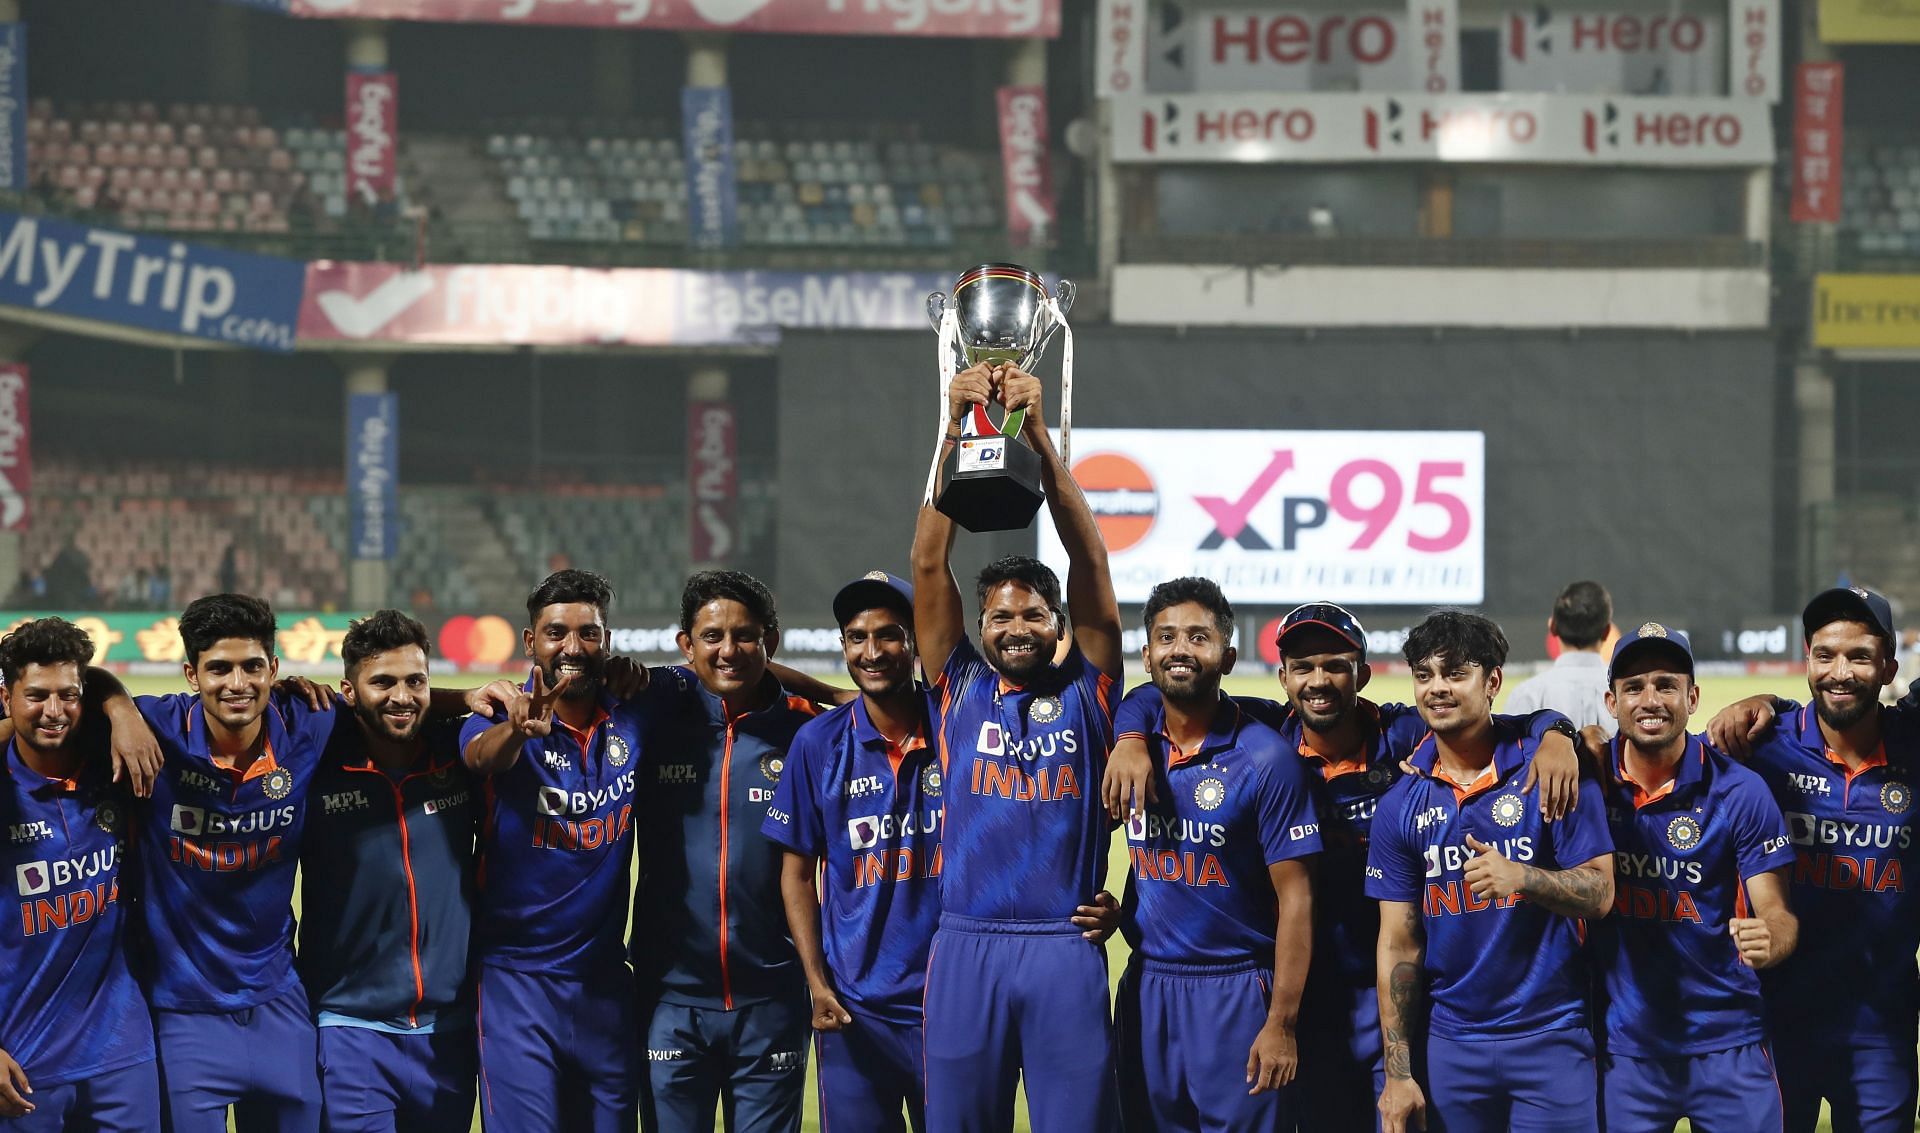 India won the Super League series against South Africa by a scoreline of 2-1 (Image: Getty)